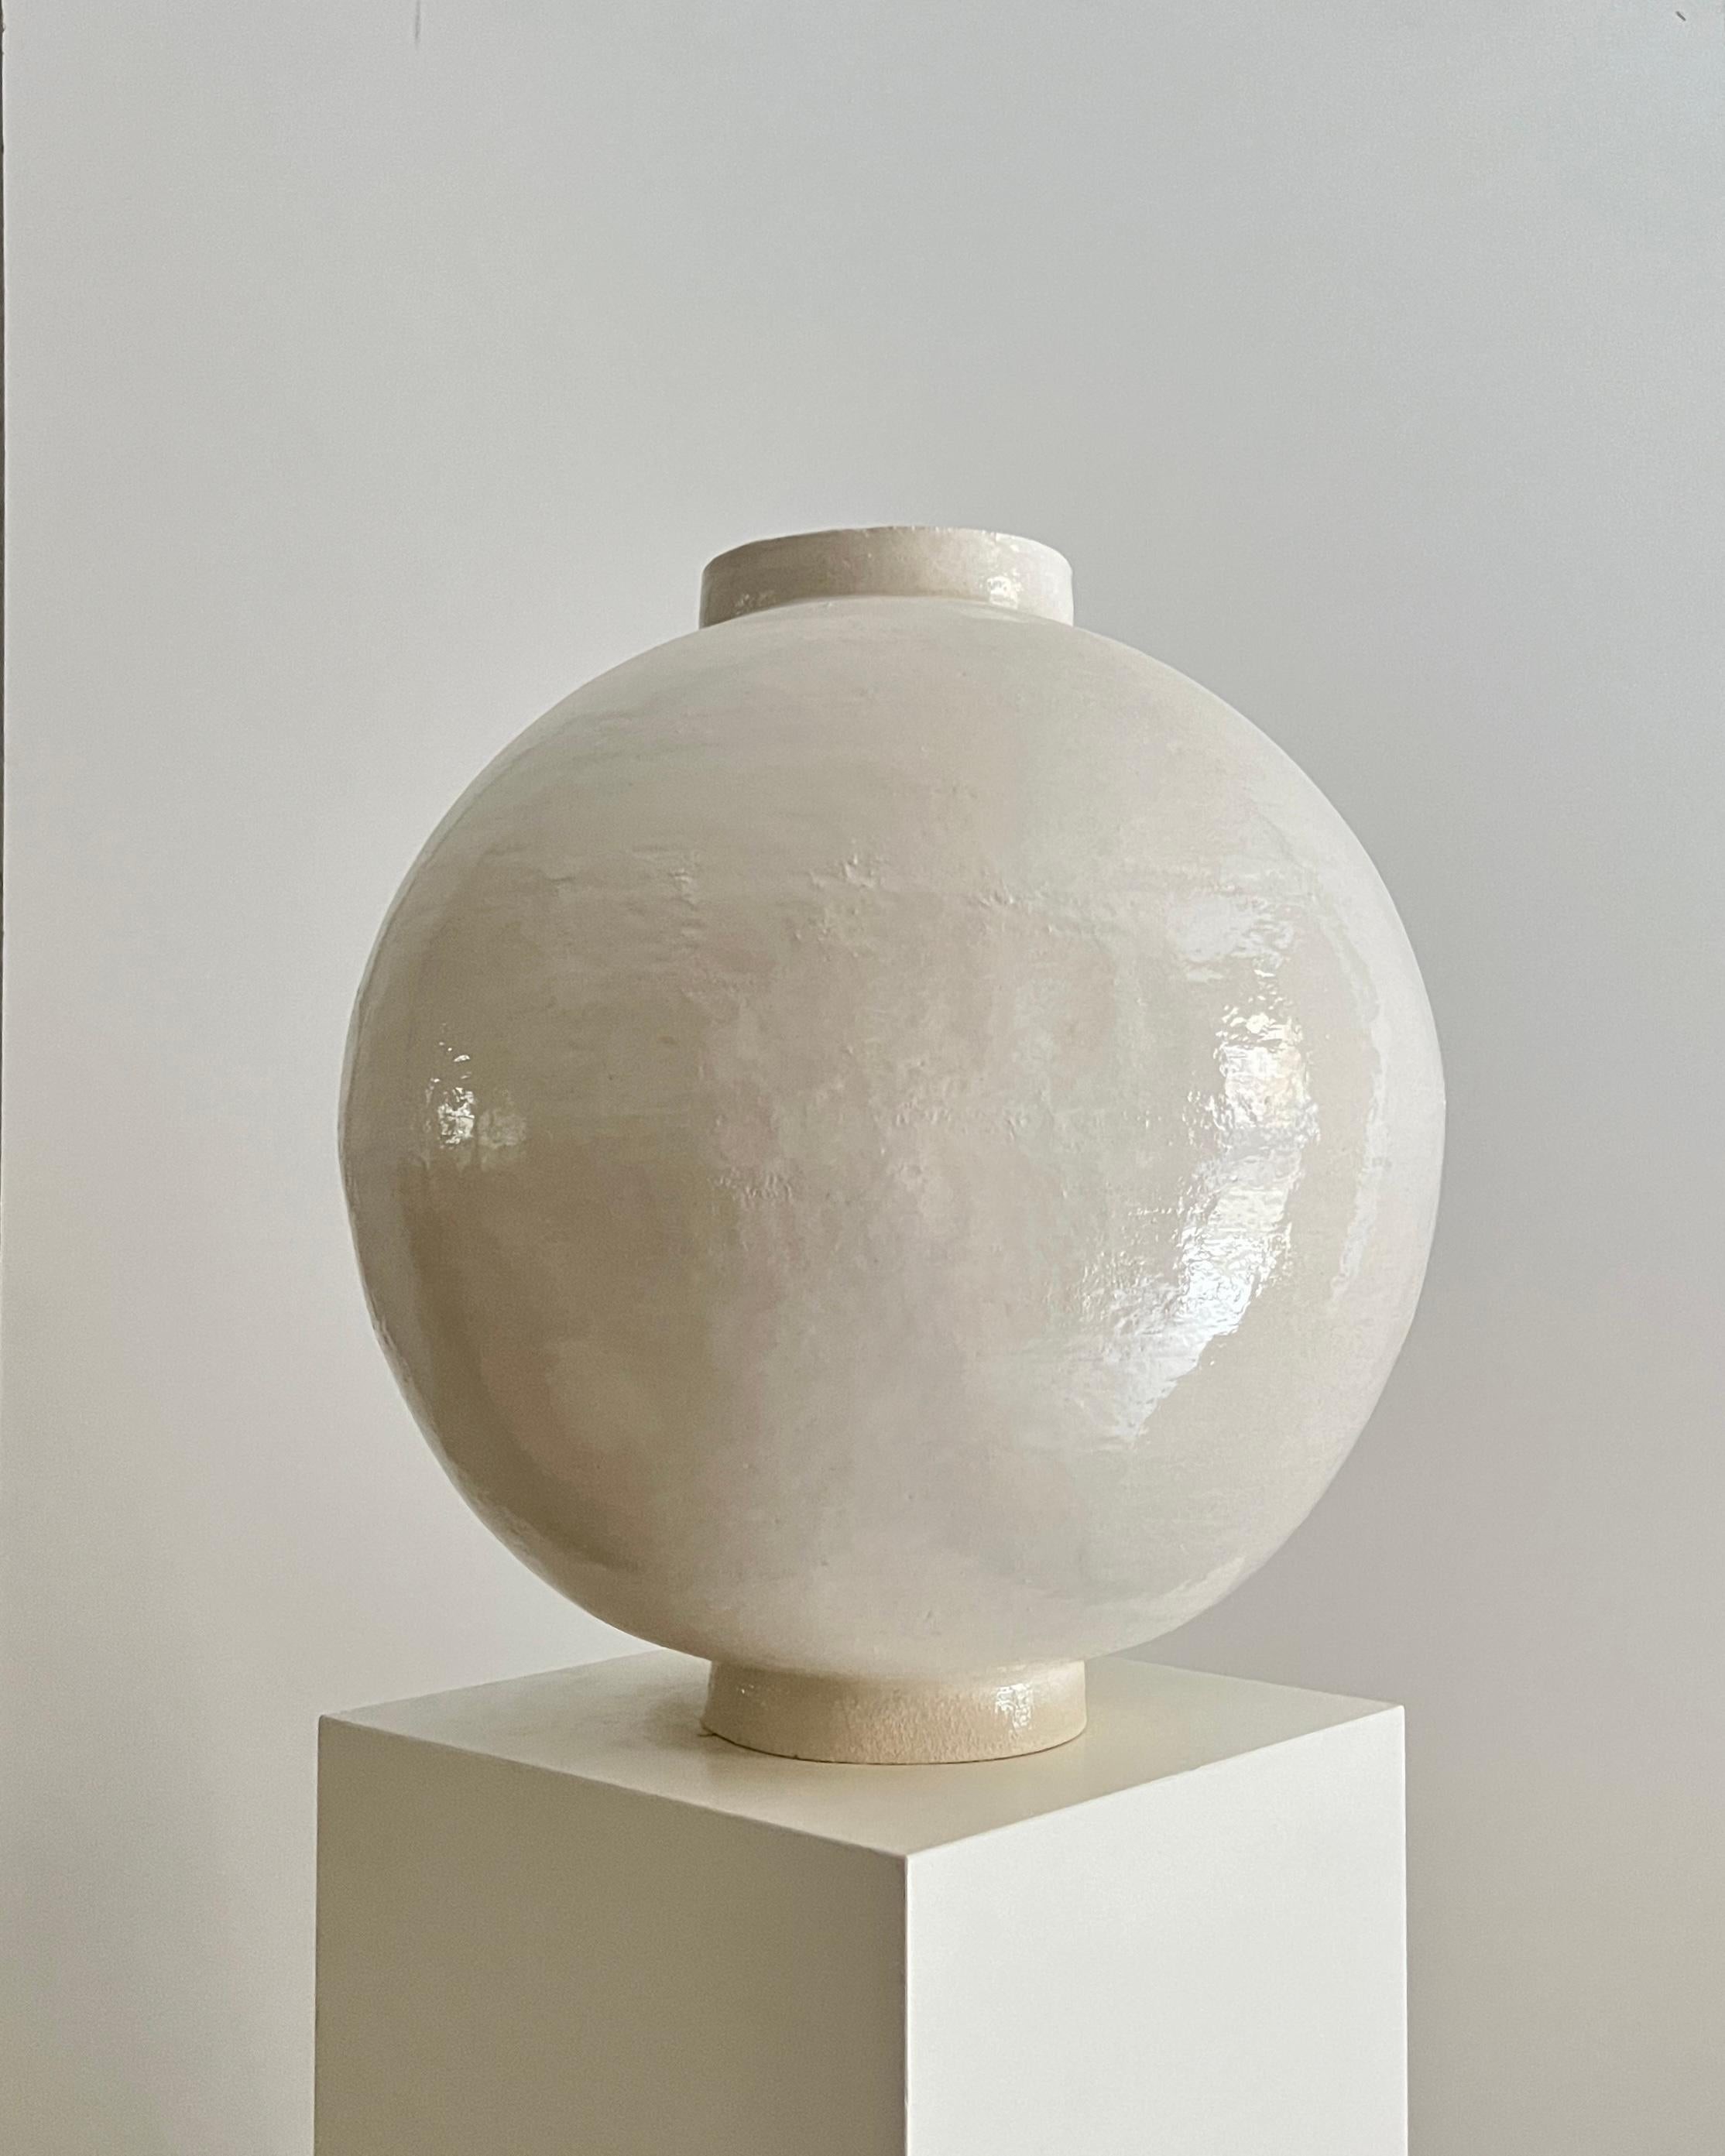 Layers Vessel by Laura Pasquino
One of a Kind
Dimensions: D 43 x H 44 cm
Material: Ceramic
Finishing: Glazed, Glossy
Artist stamp on the bottom
 
Laura Pasquino
Incorporating references from ancient Korean ceramics as well as principles of Japanese